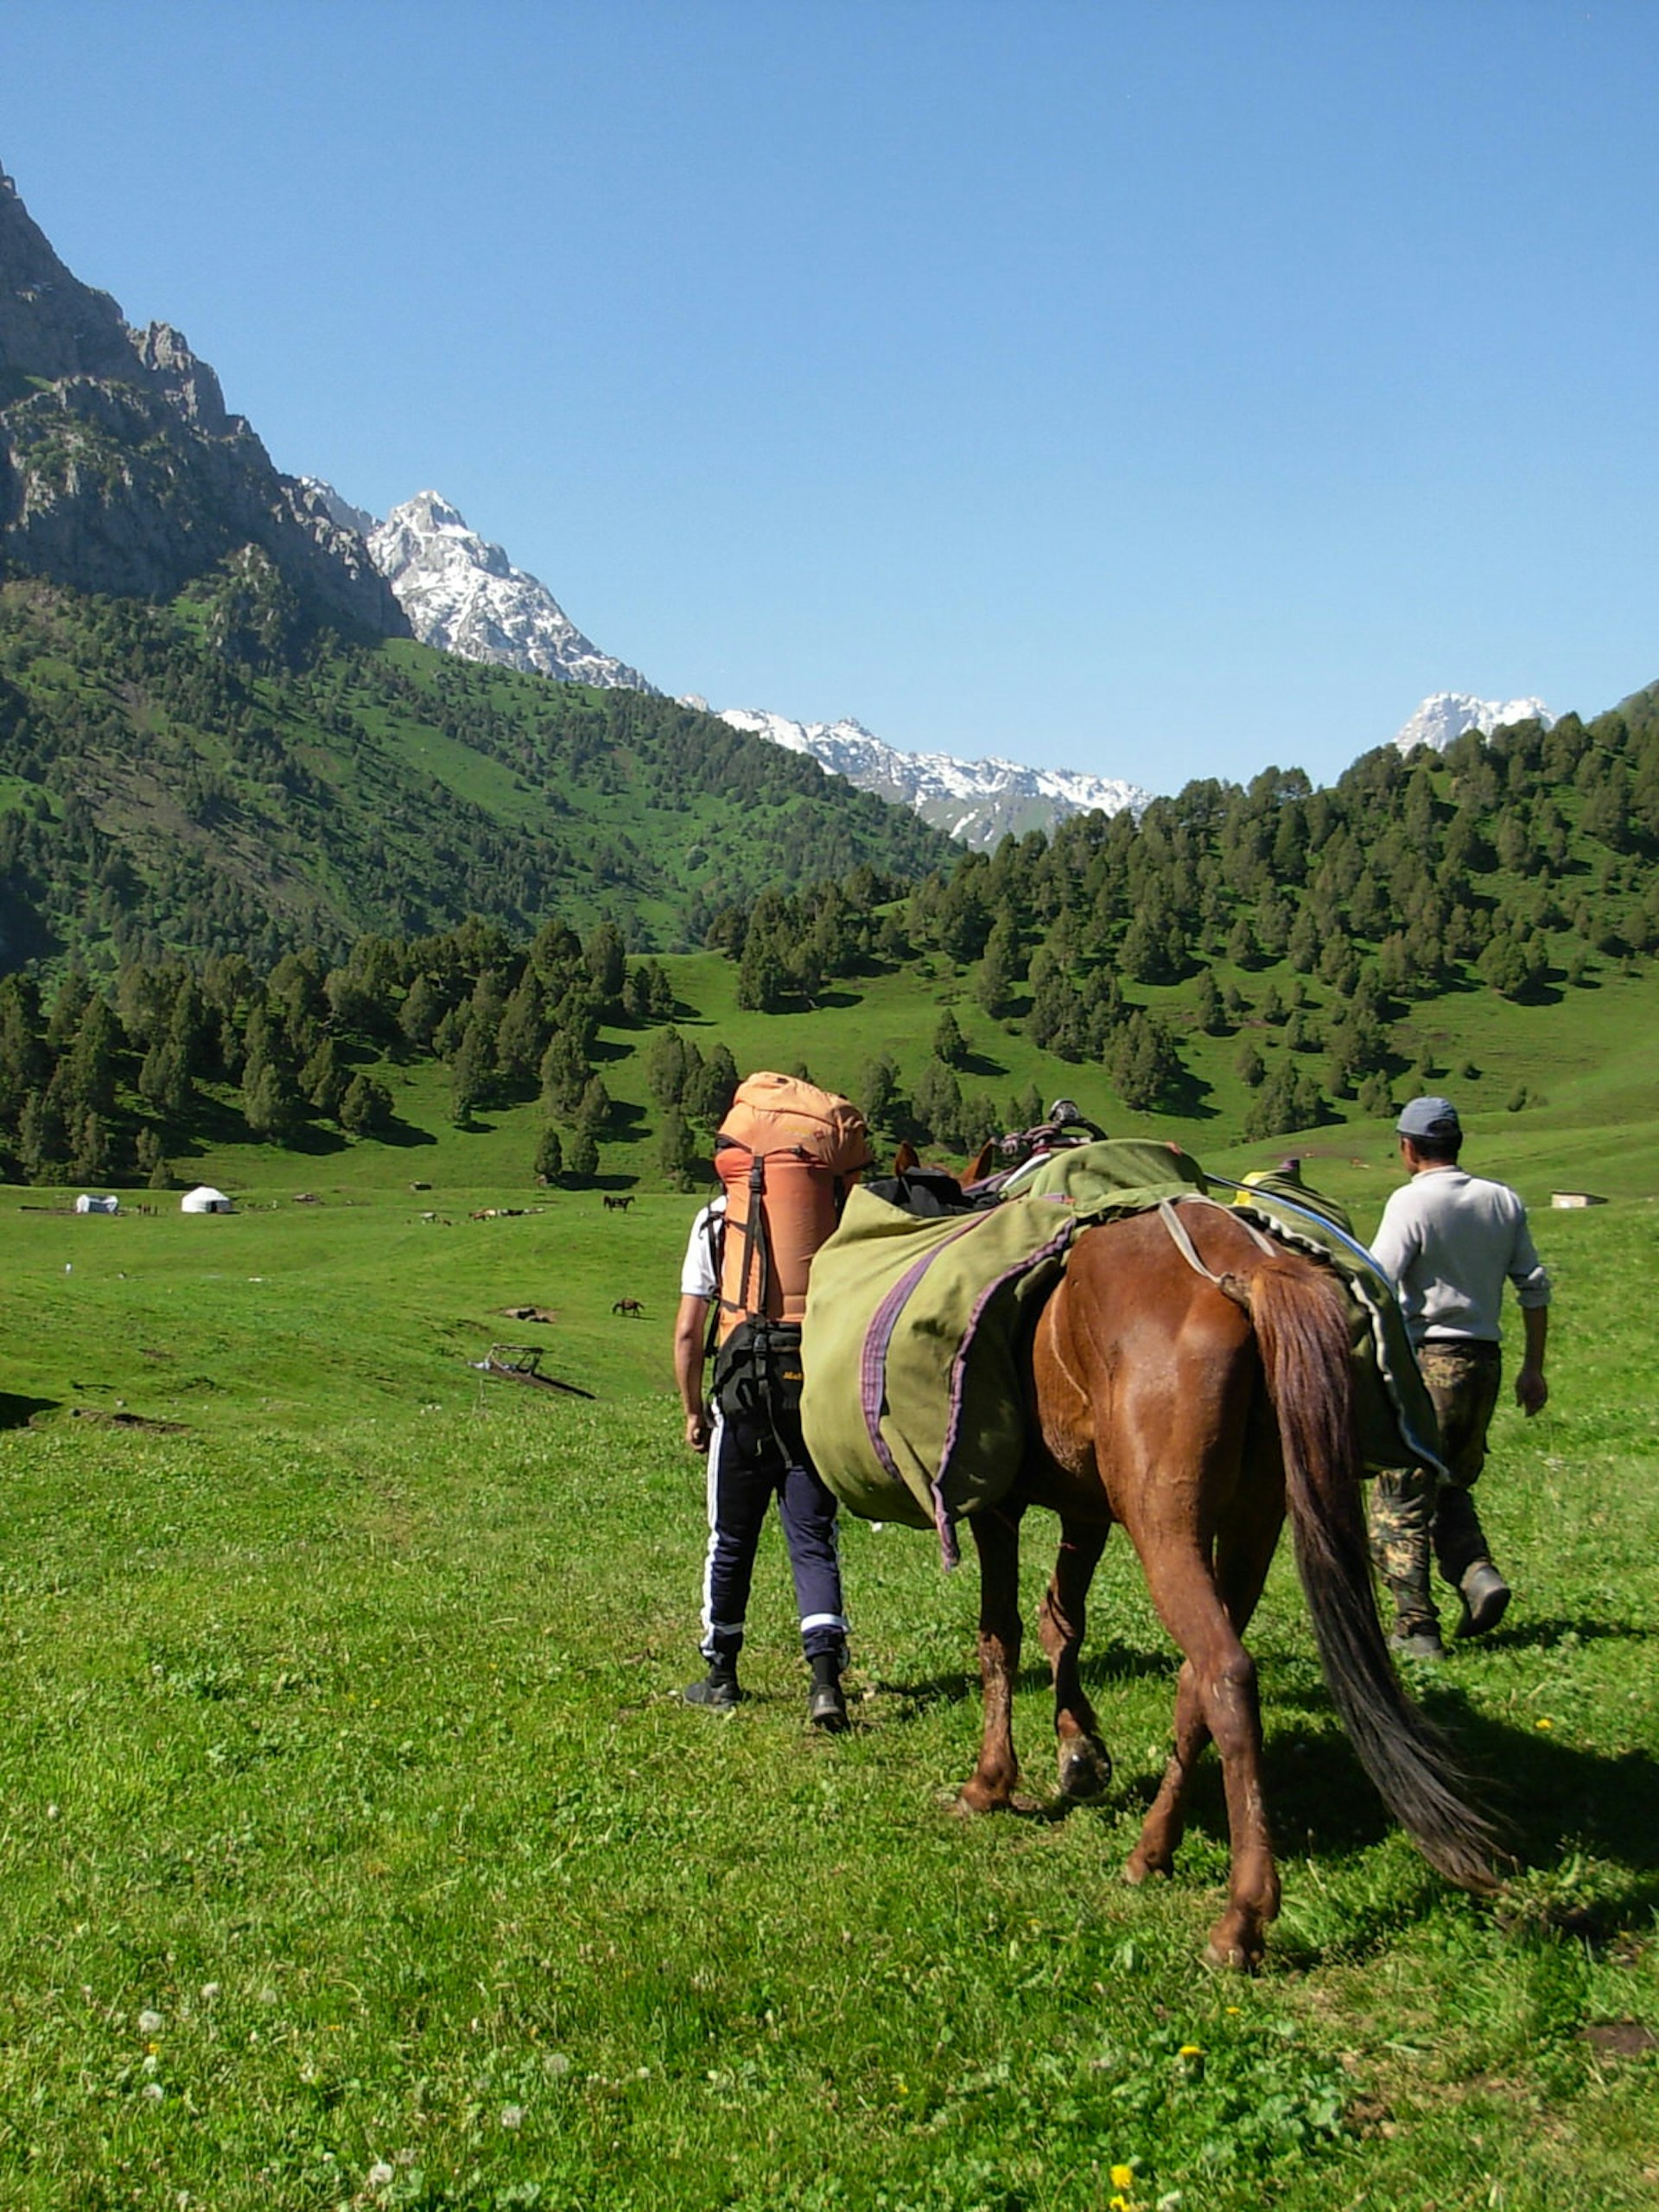 Horse trekking is a popular choice for day trips in the Alay Valley © Bradley Mayhew / Lonely Planet